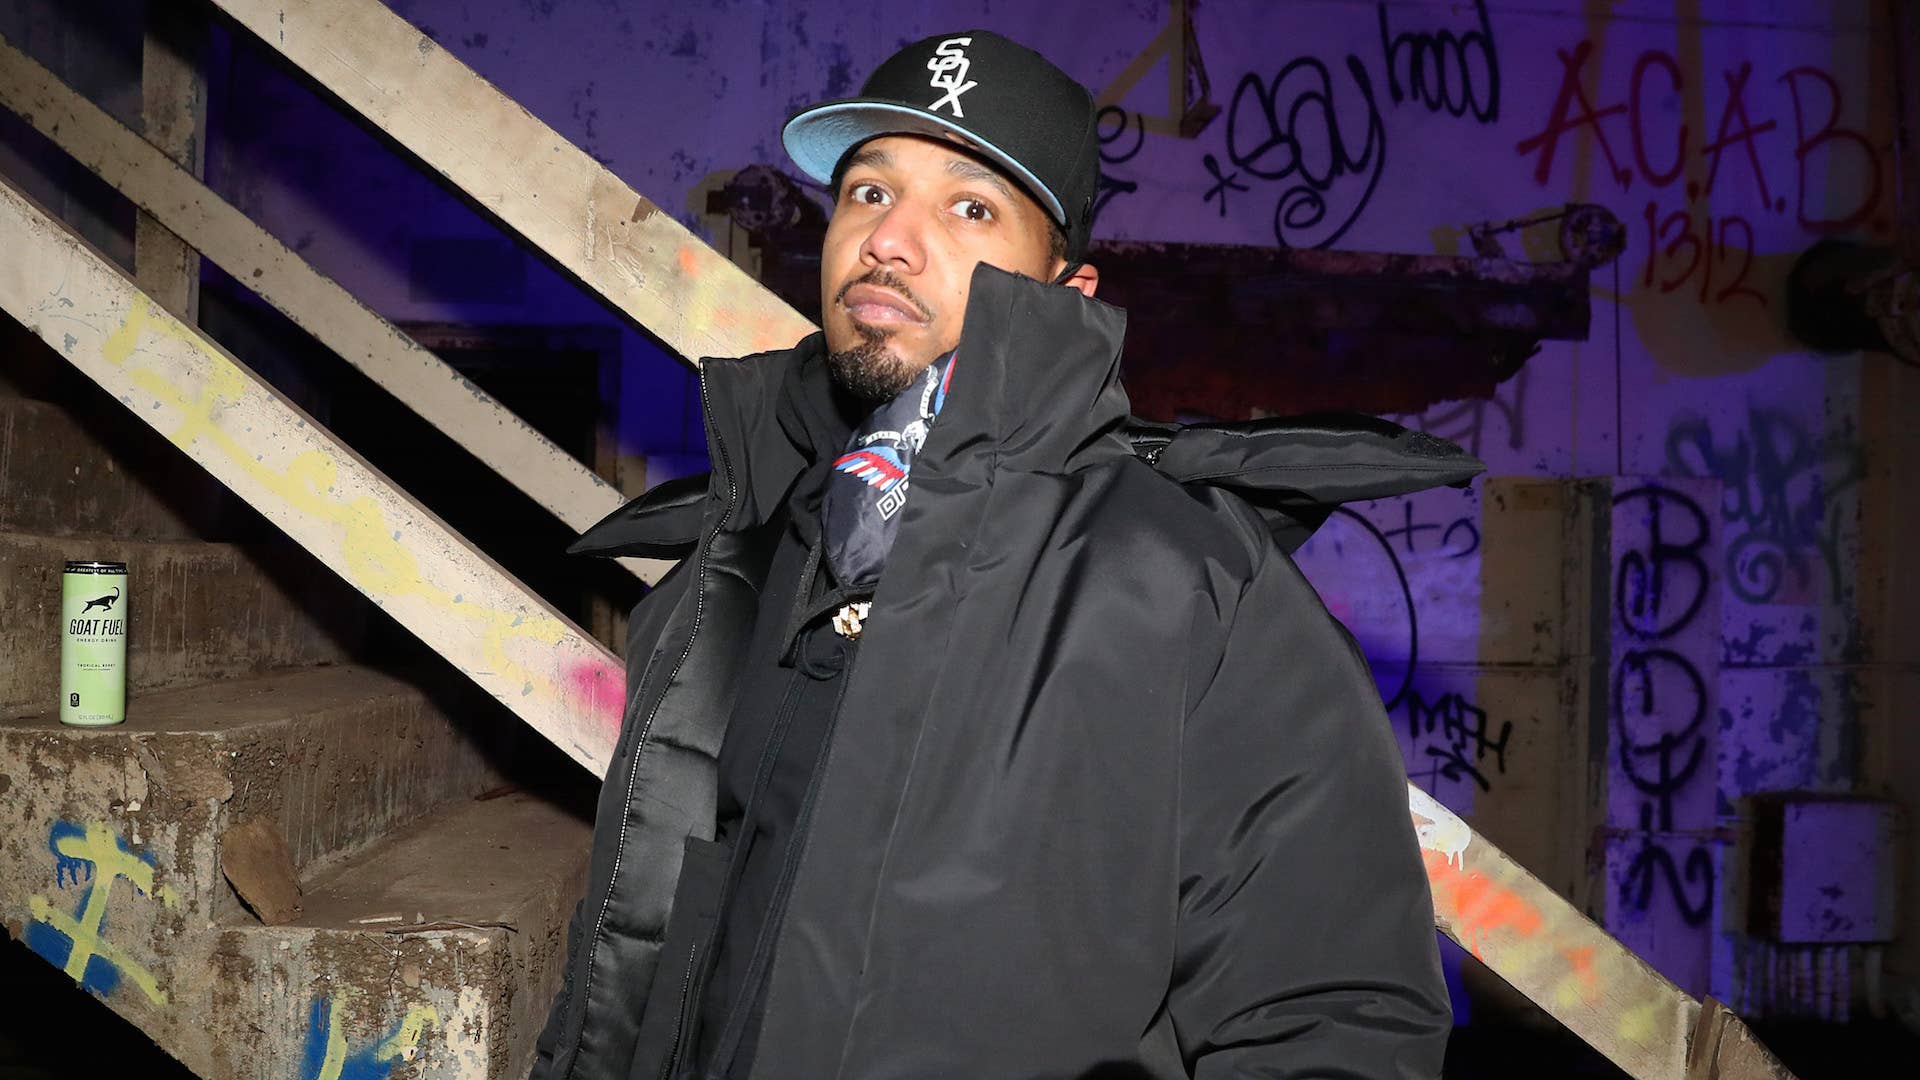 Juelz Santana attends the "Drip, Sauce, Swag" Listening Party